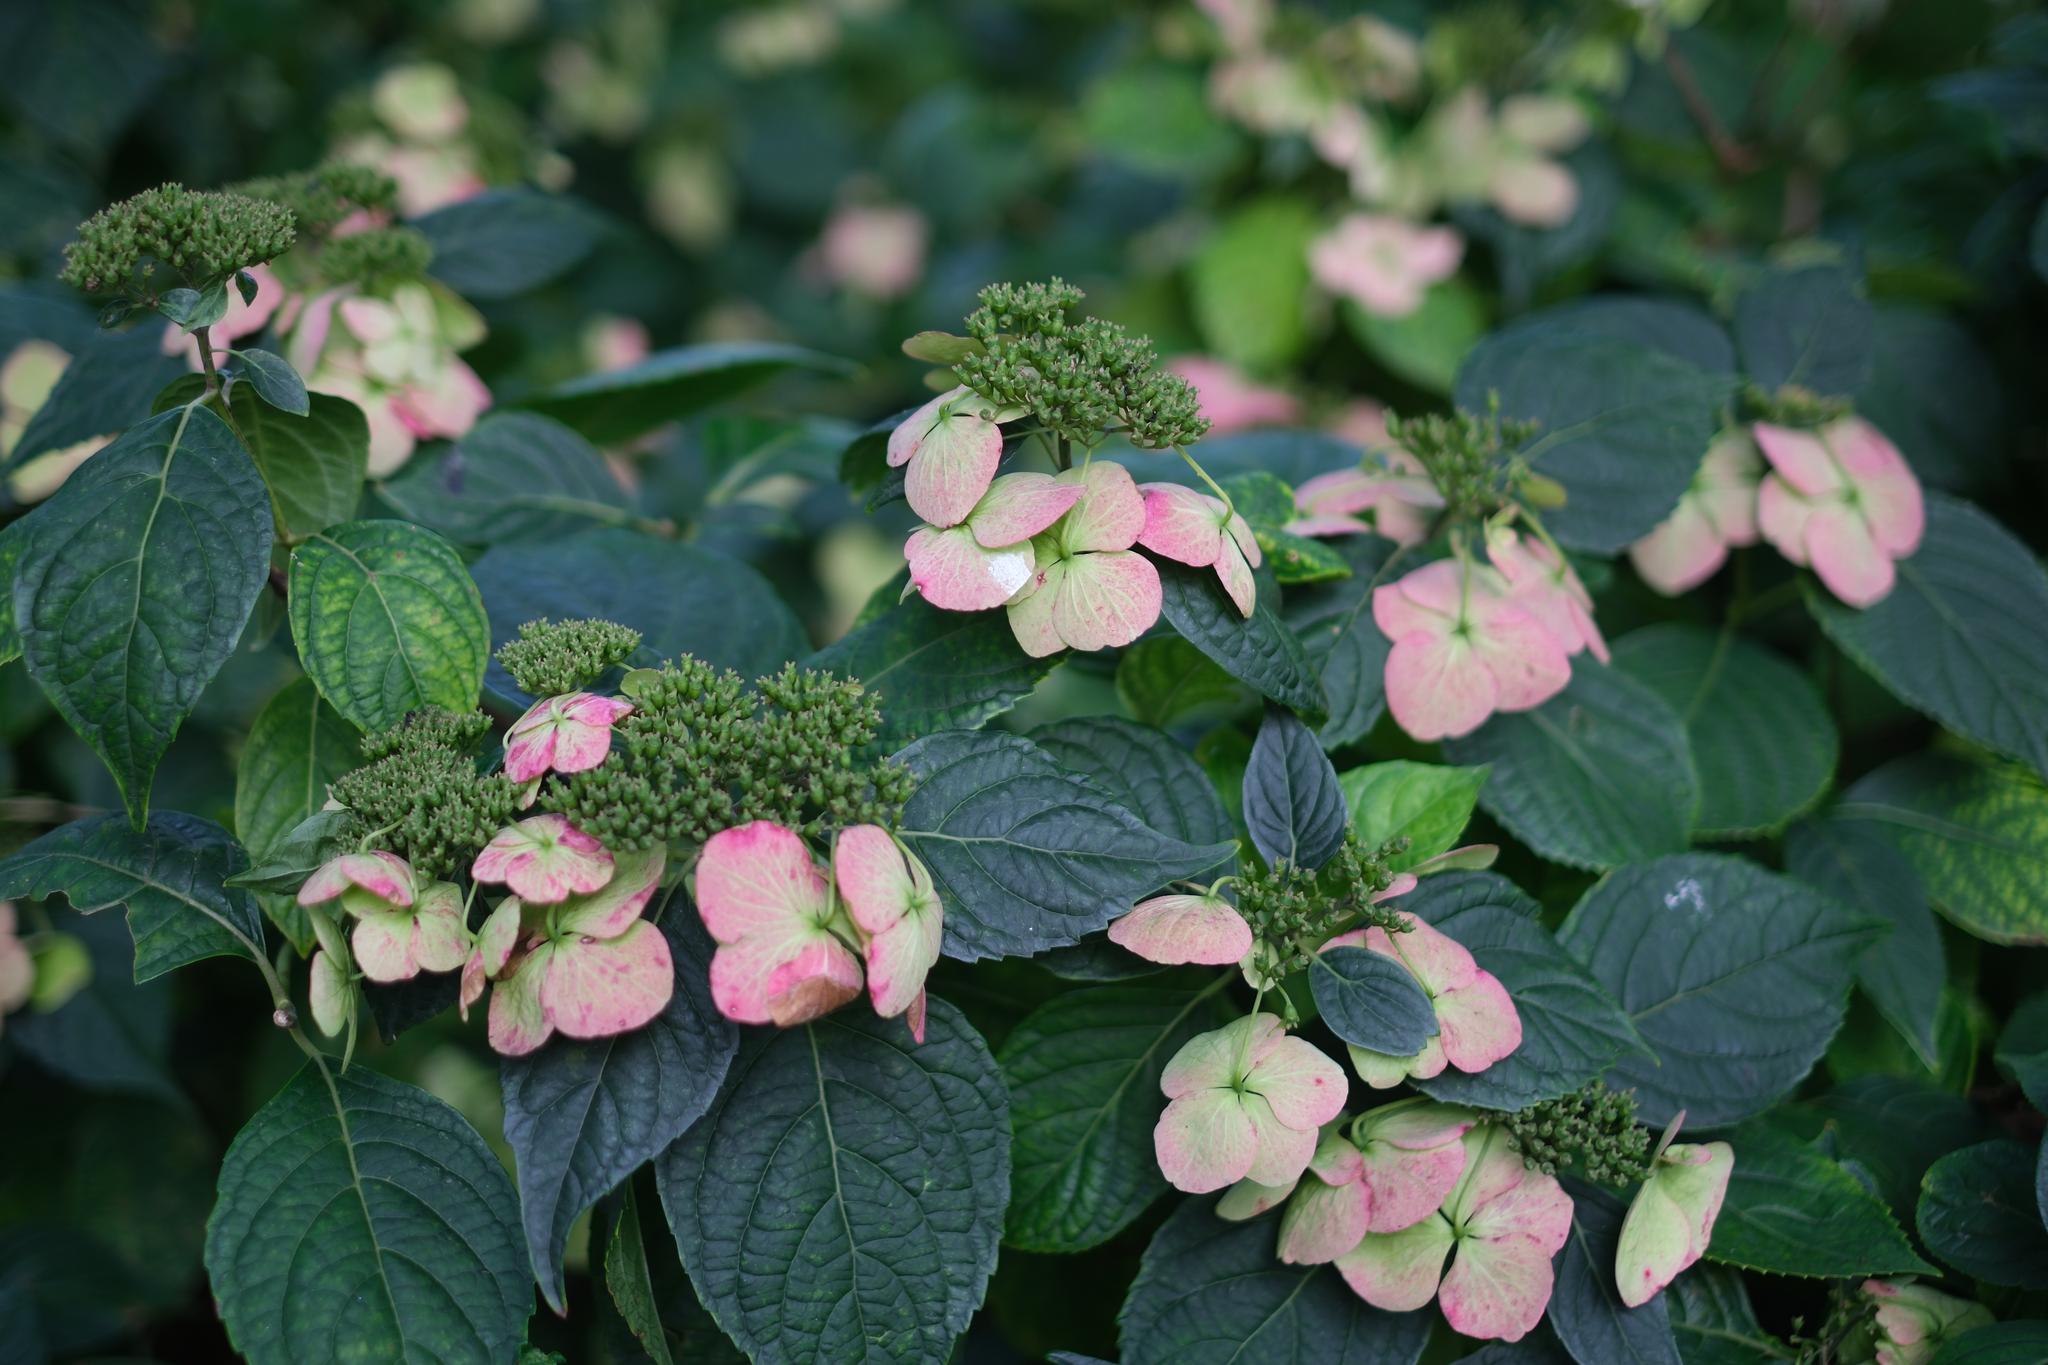 A cluster of green leaves and pink flowers in a garden setting